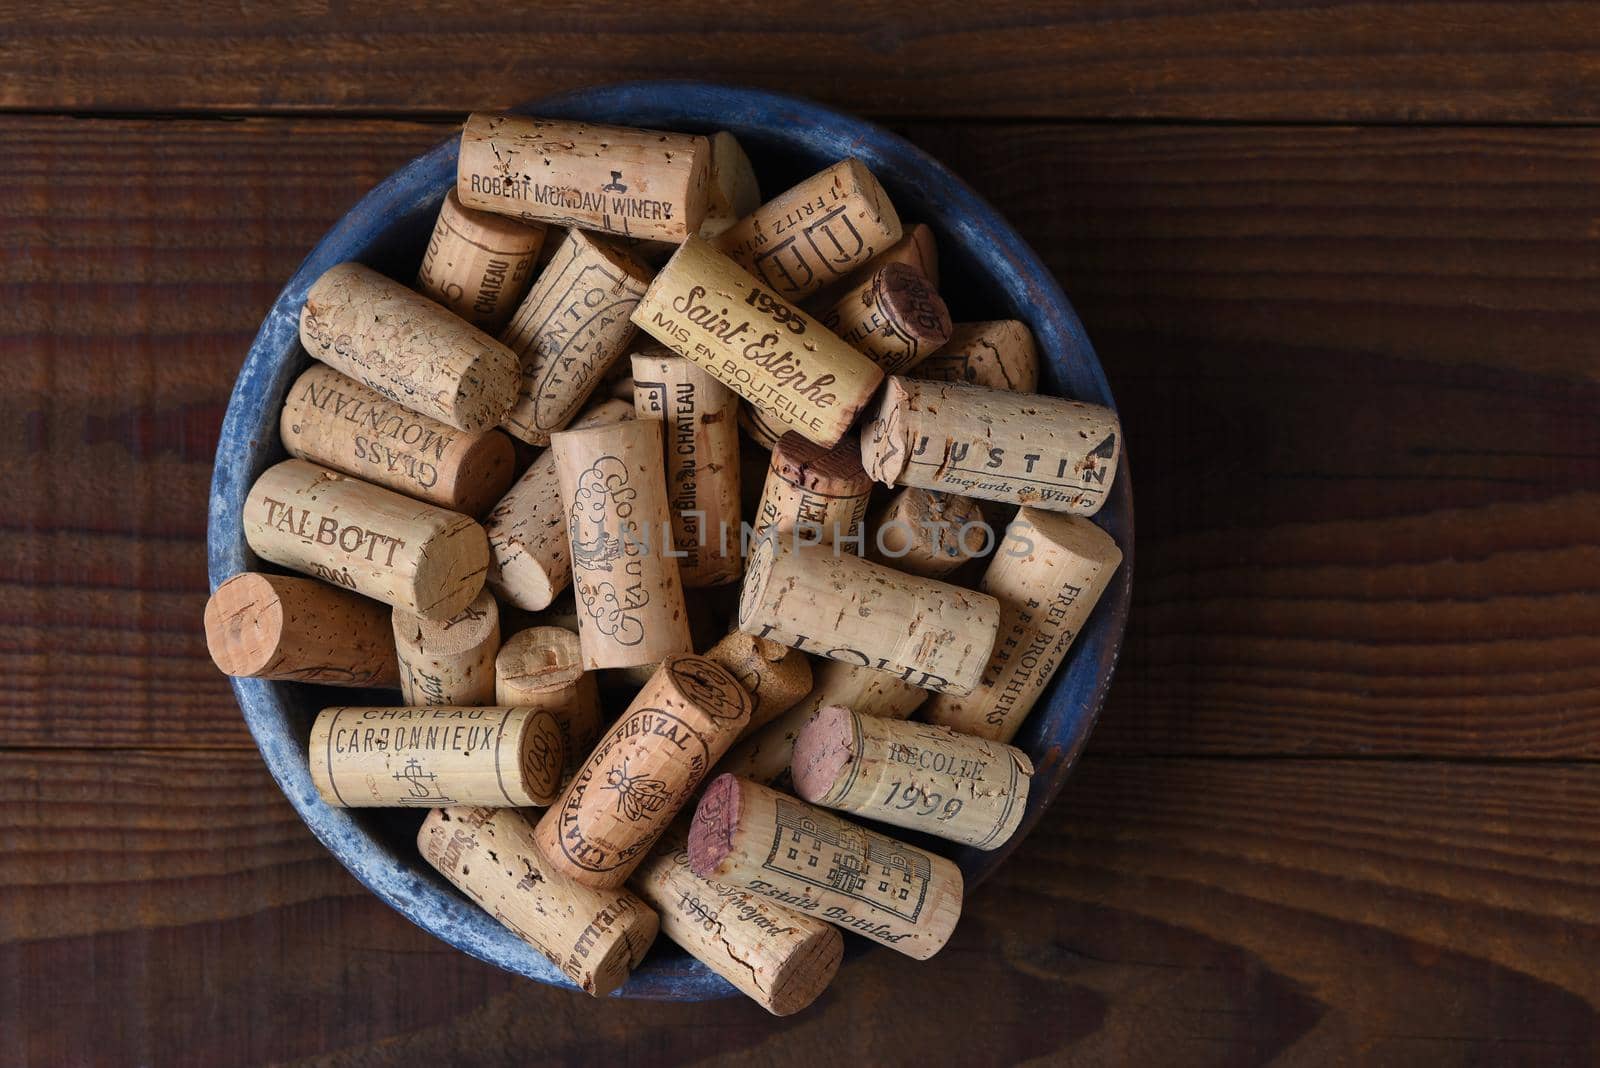 IRIVNE, CALIFORNIA - 26 JAN 2020: A group of branded wine corks in a bowl from domestic and foreign wineries.